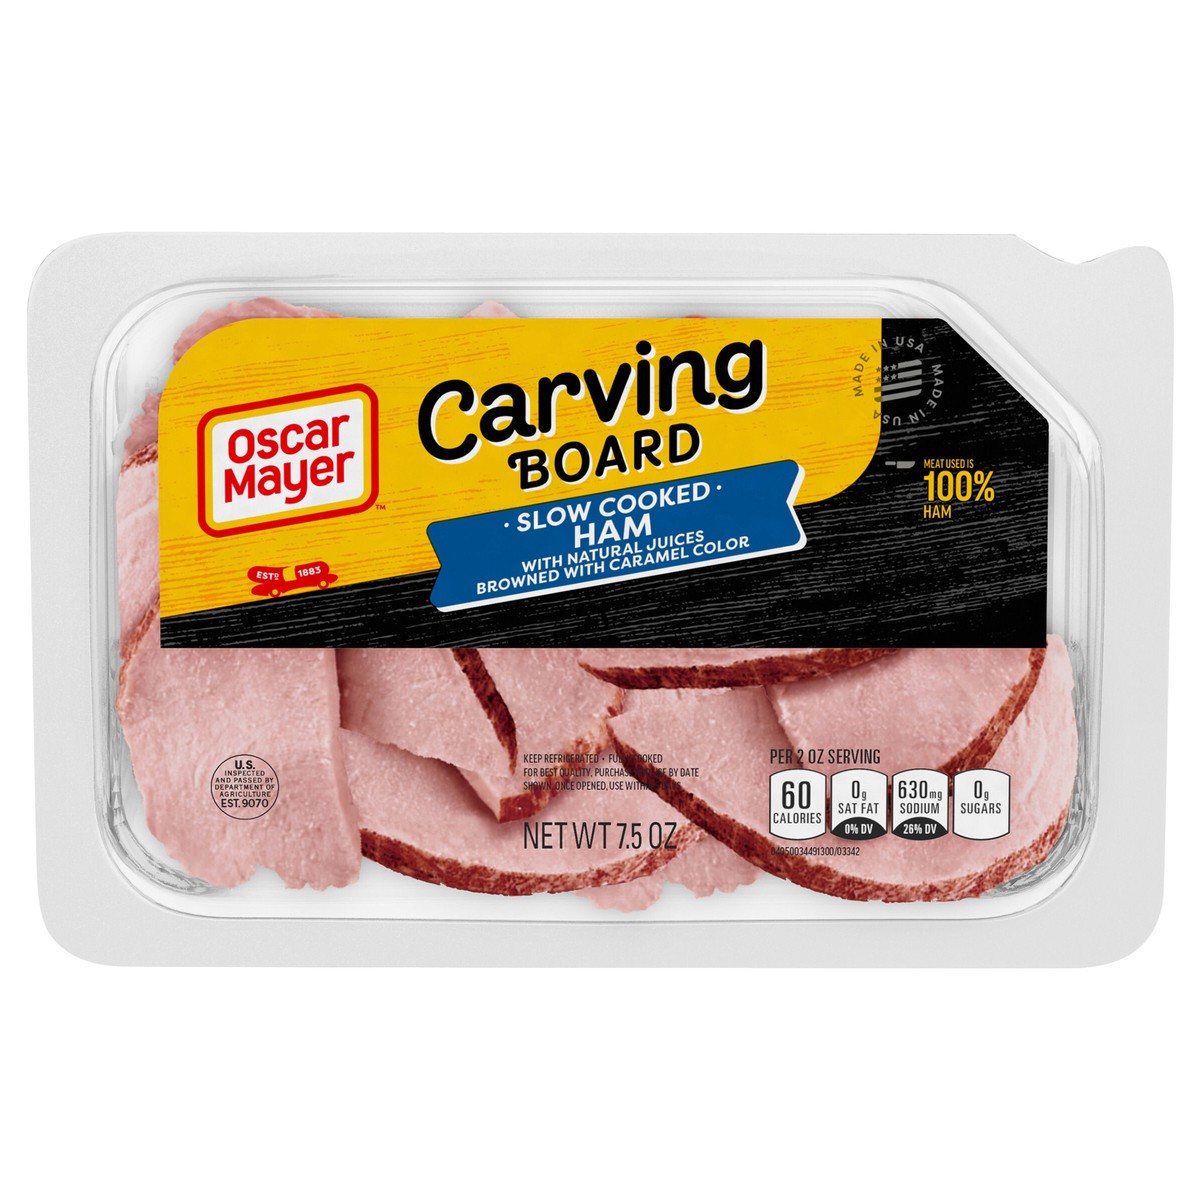 slide 1 of 9, Oscar Mayer Carving Board Slow Cooked Ham Sliced Lunch Meat, 7.5 oz. Tray, 7.5 oz